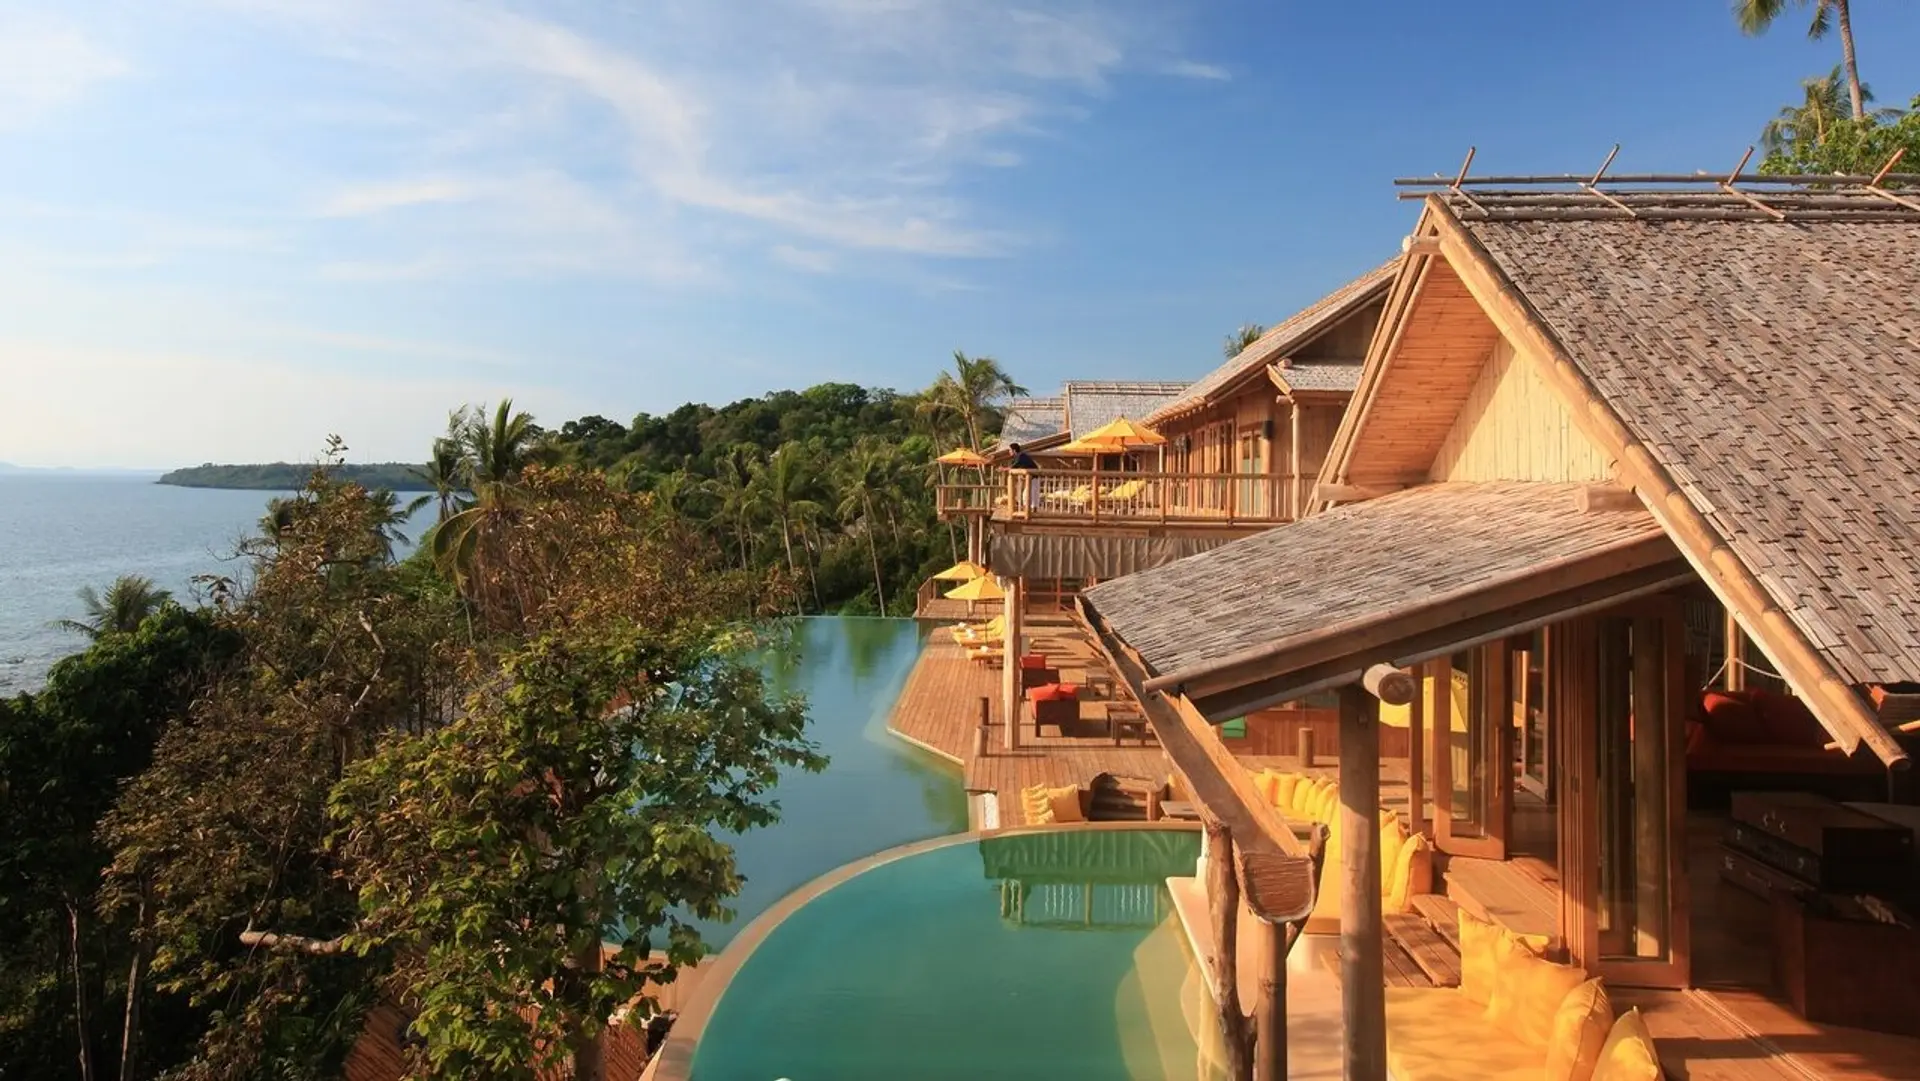 Hotels Toplists - Ten Of The Most Luxurious Eco-Friendly Hotels & Resorts